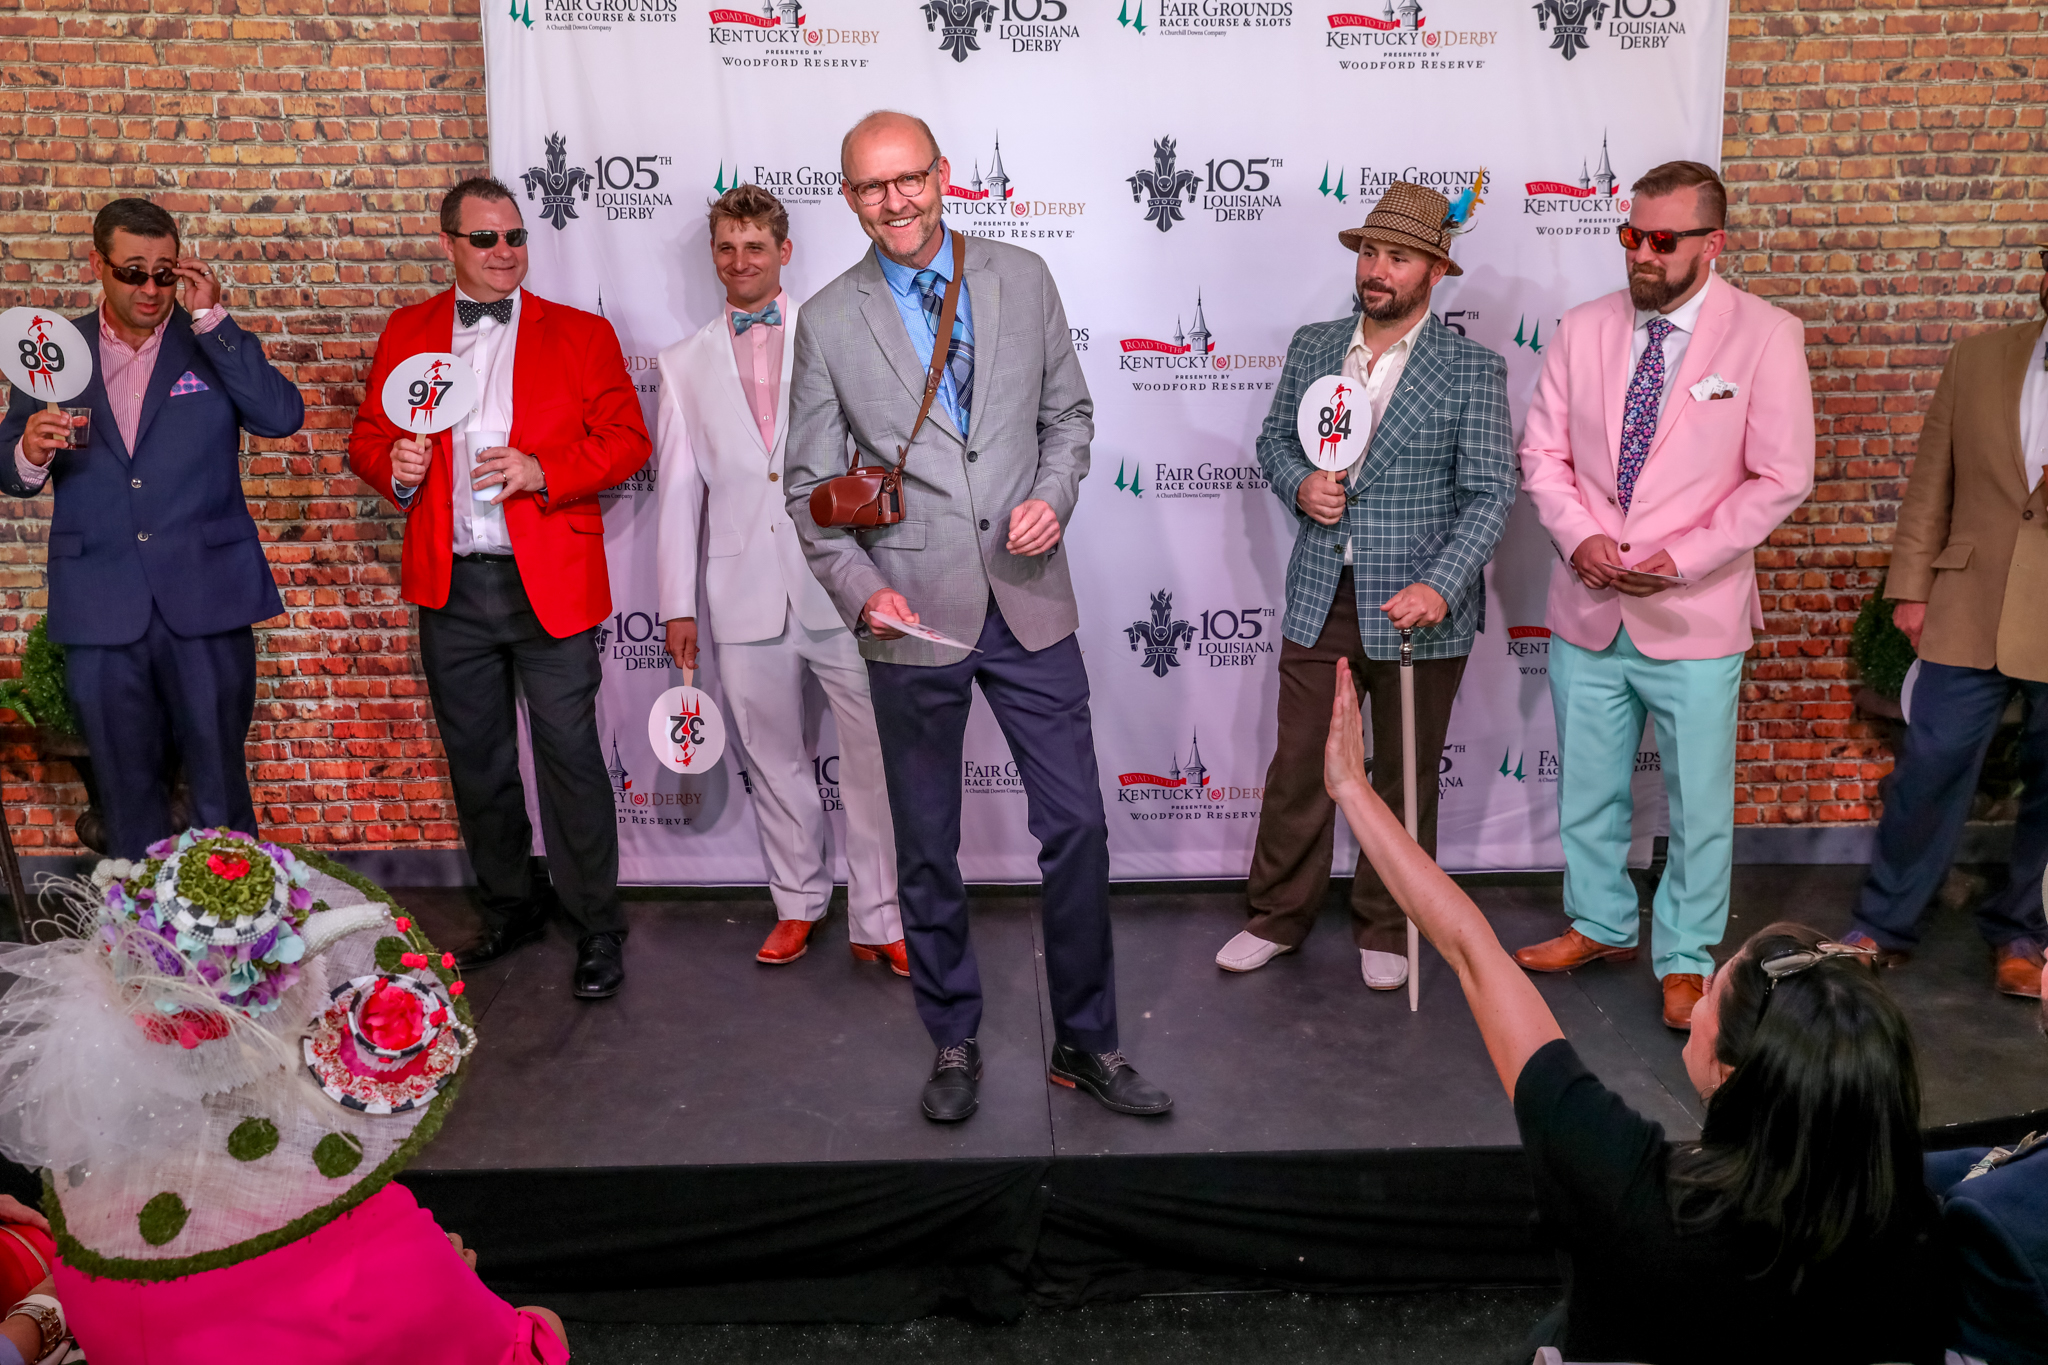 Fashion at the Races Louisiana Derby 2018 (39)